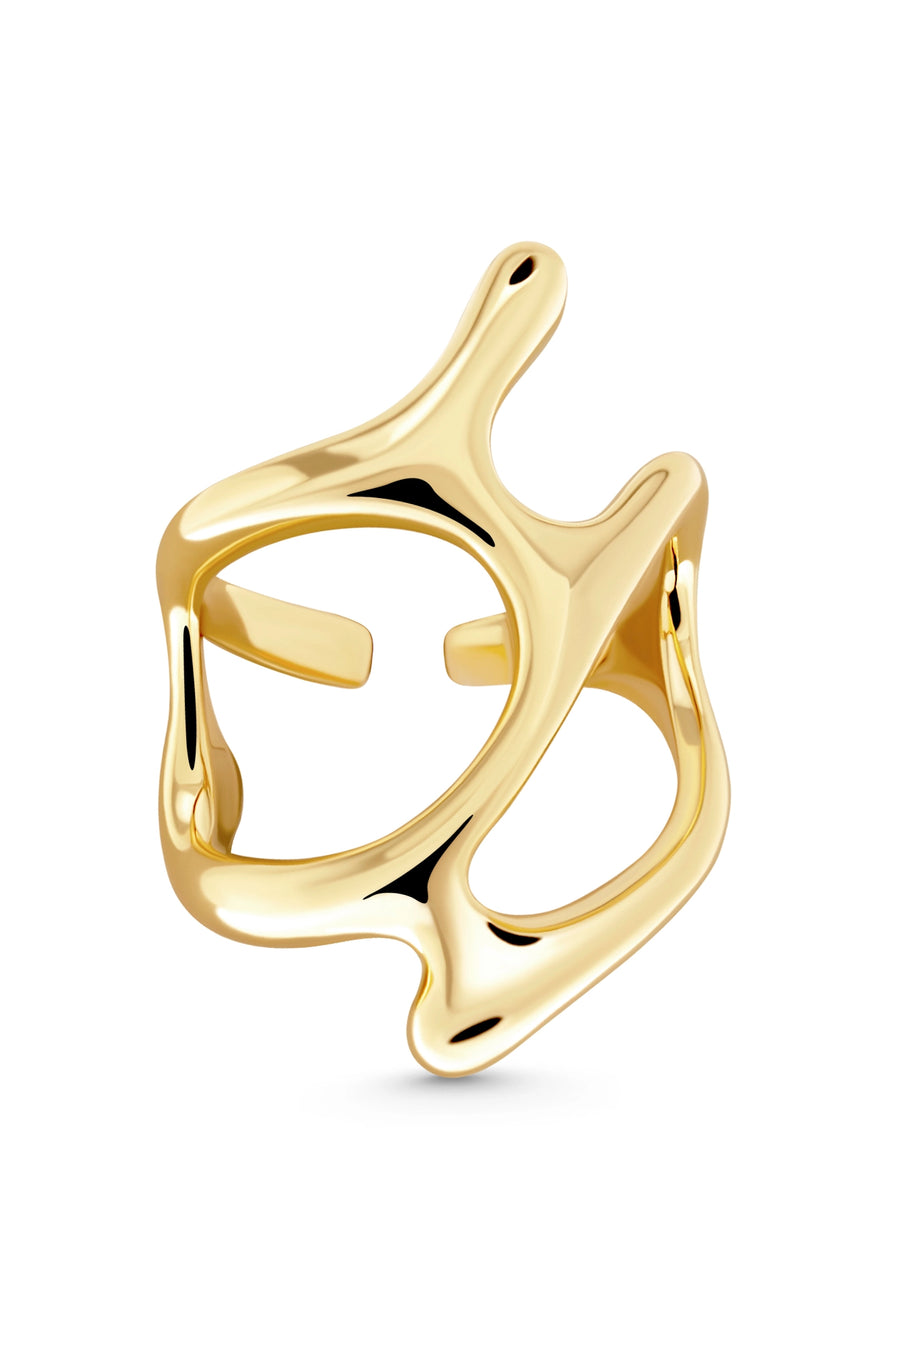 MARVEL Ring. Ring featuring intricate lines pattern, open-ended, cant fit on size US5-7, 18K gold vermeil, handmade, hypoallergenic, water-resistant